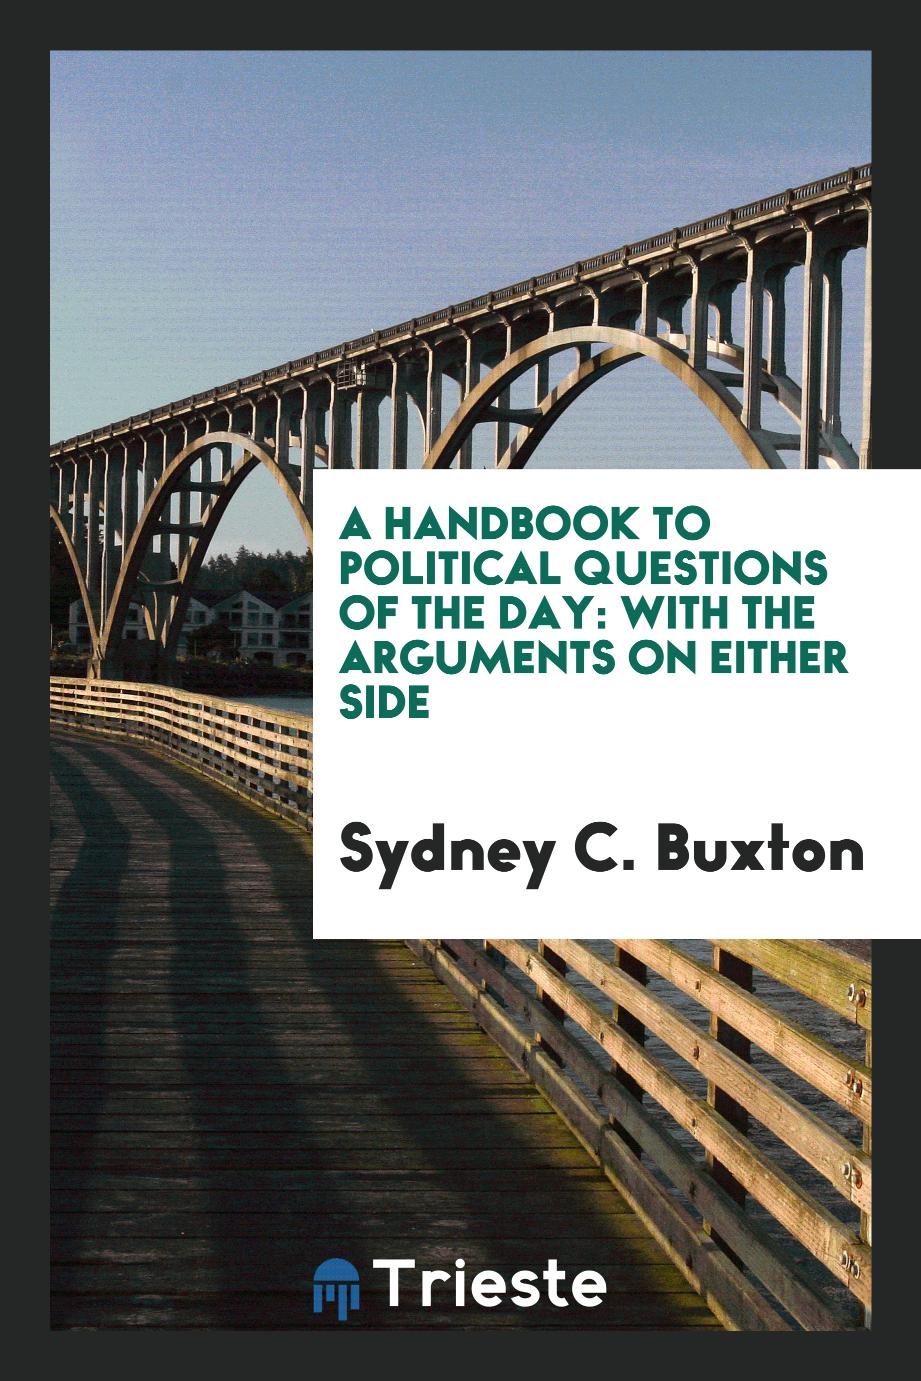 A Handbook to Political Questions of the Day: With the Arguments on Either Side